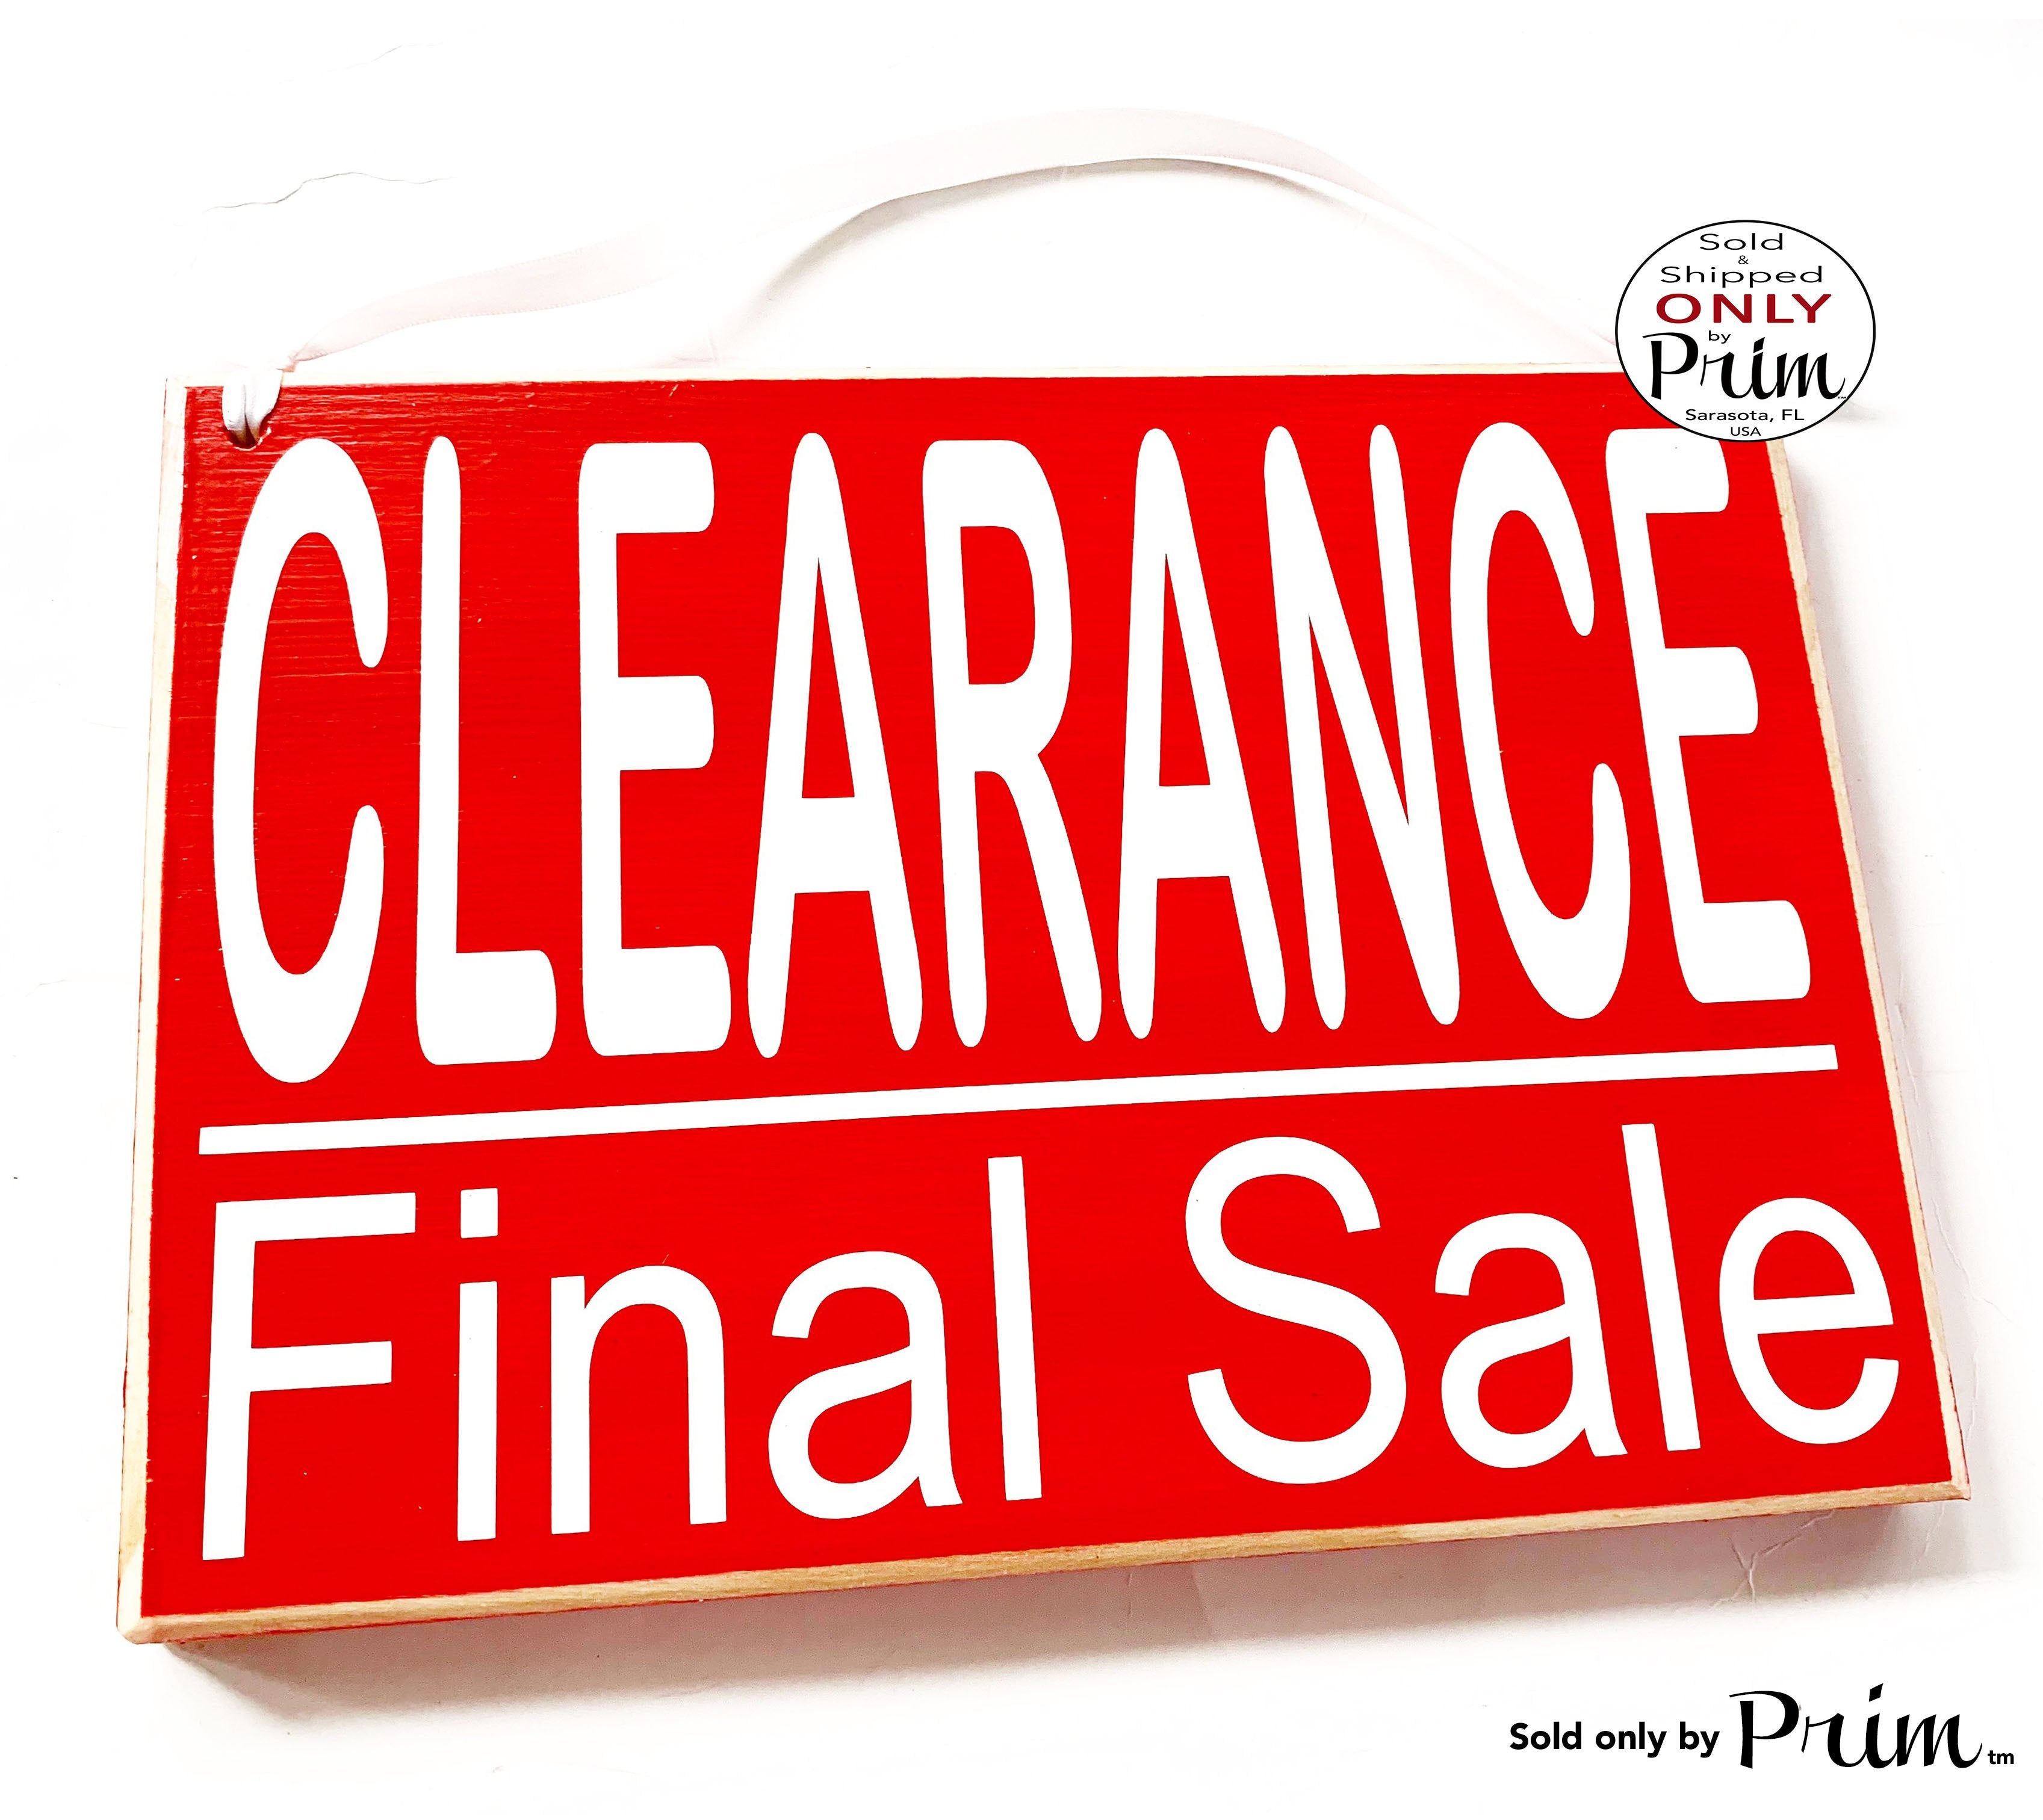 10x8 Clearance Sale Wood Retail Store Business Sign – Designs by Prim